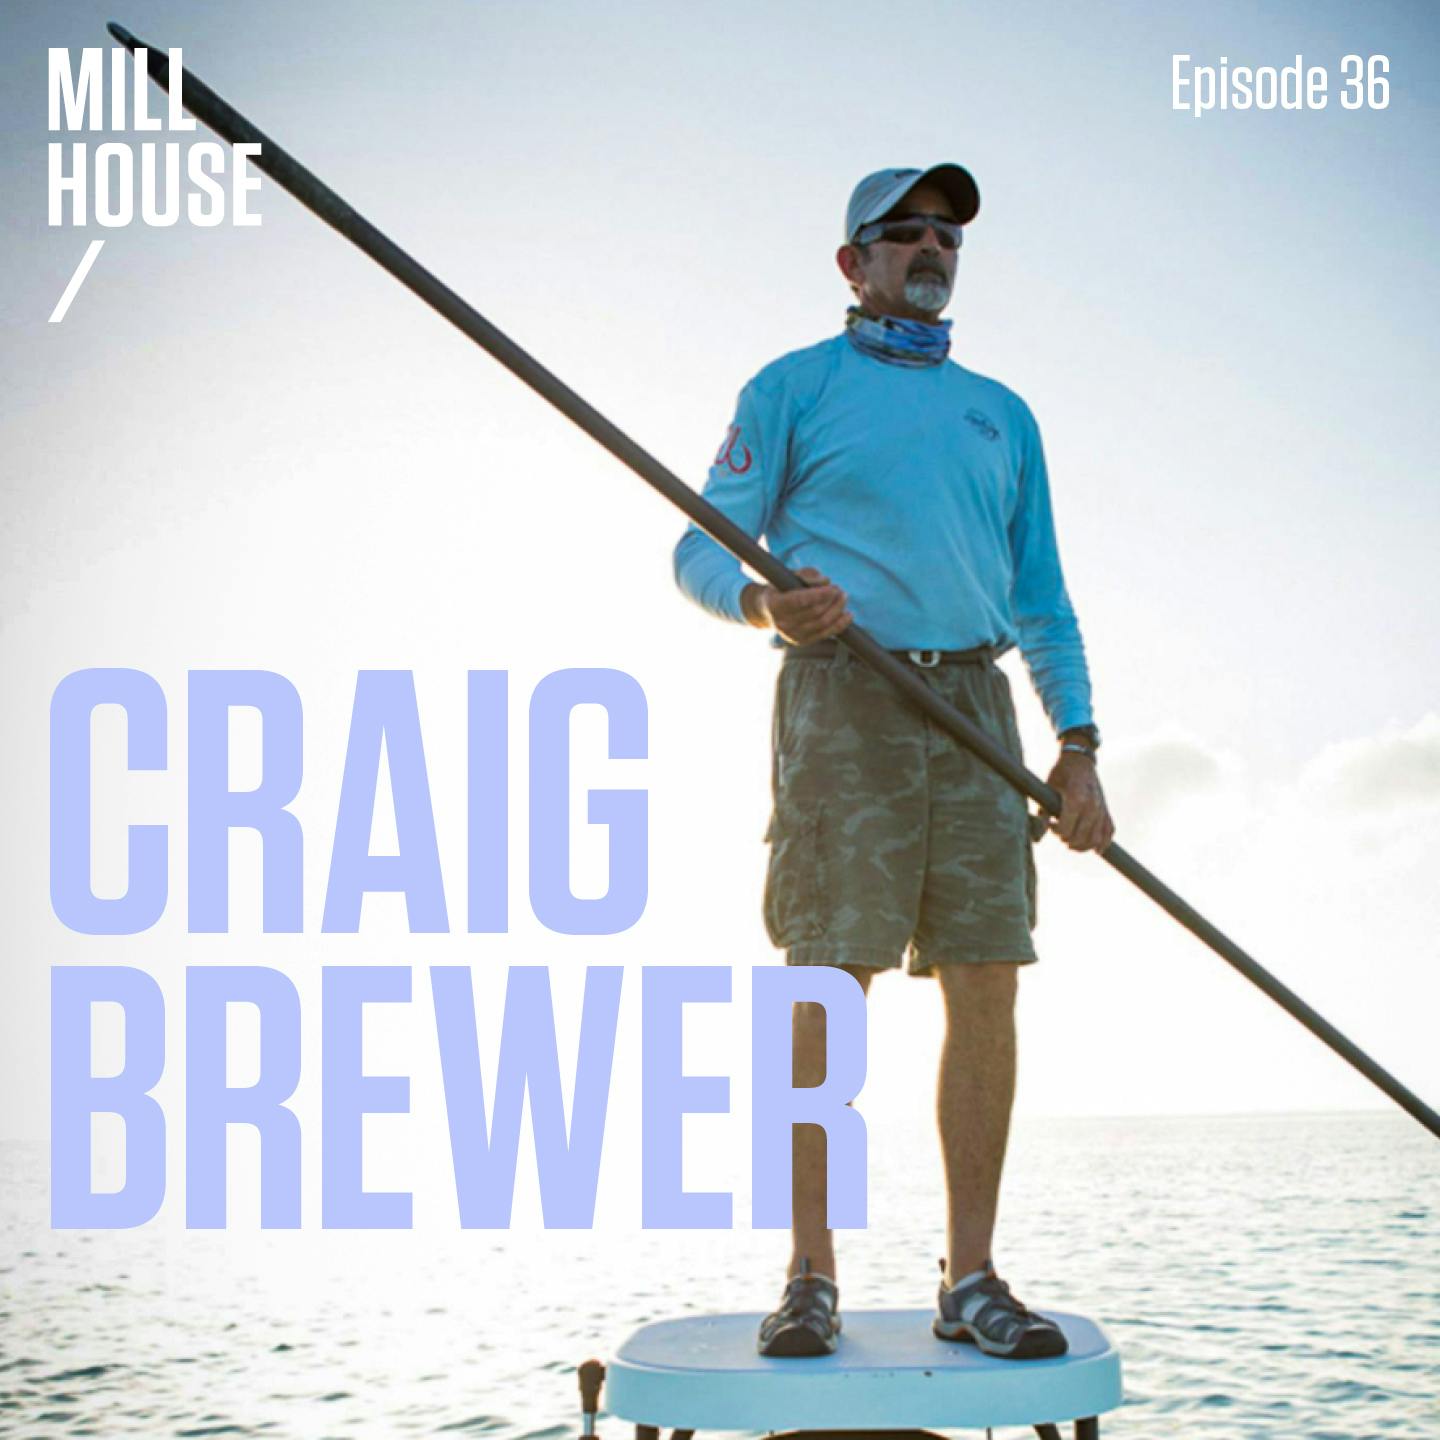 Episode 36: Capt. Craig Brewer - The Mud Man – Mill House Podcast